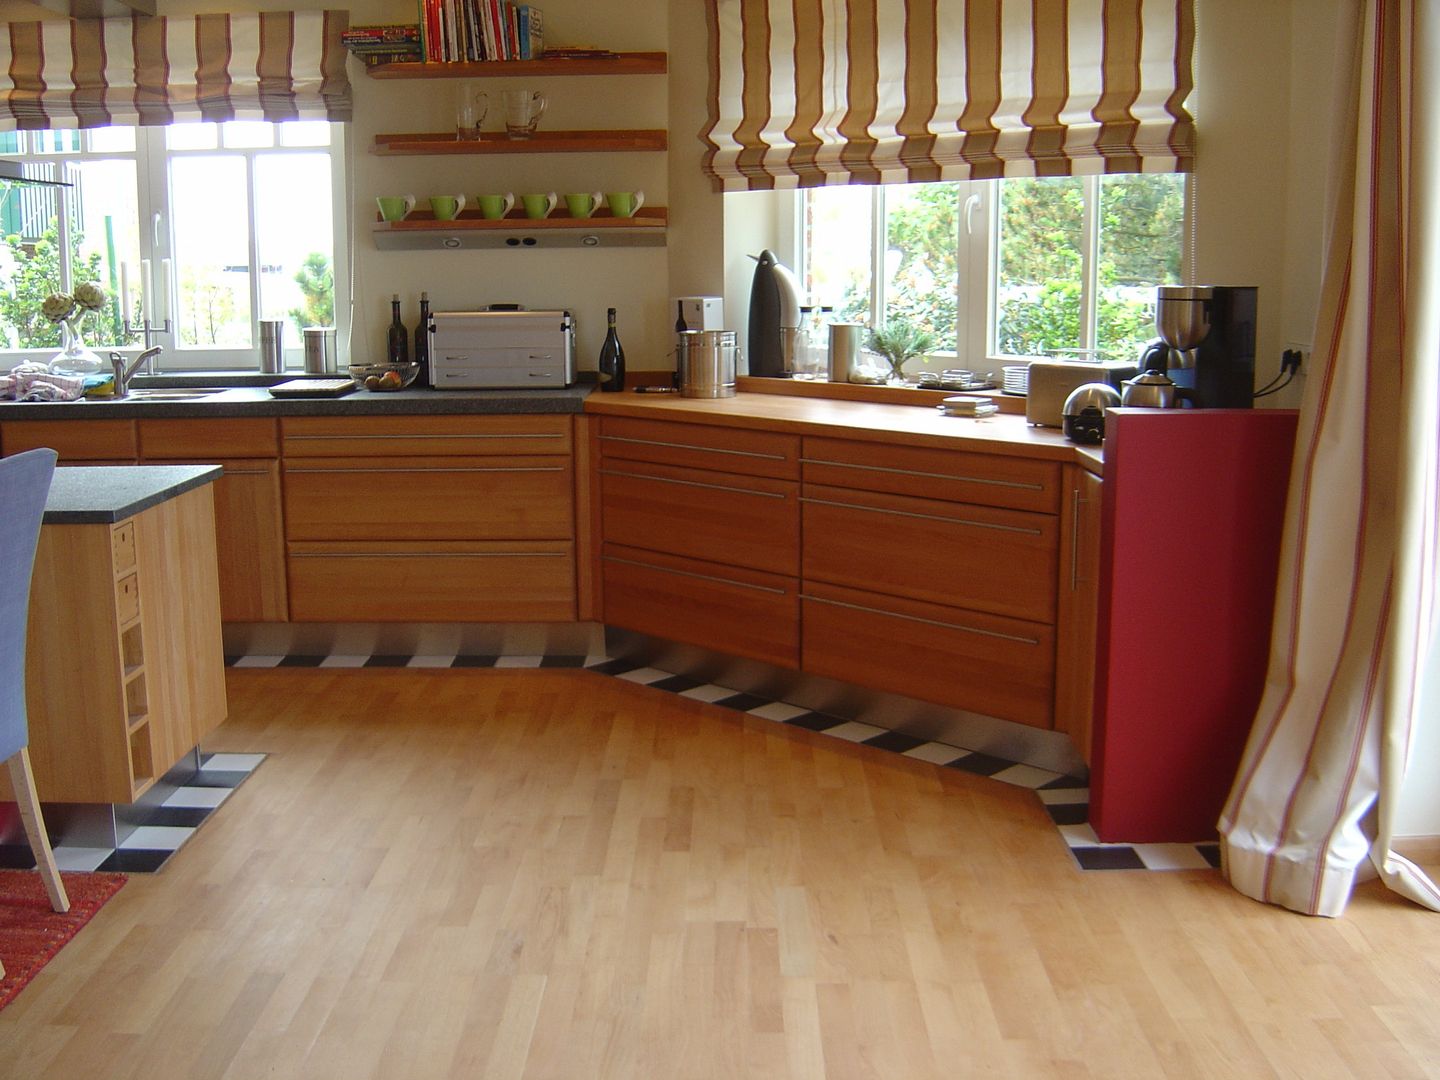 Ferienhaus Nordsee, made by S / creativport hamburg made by S / creativport hamburg Kitchen